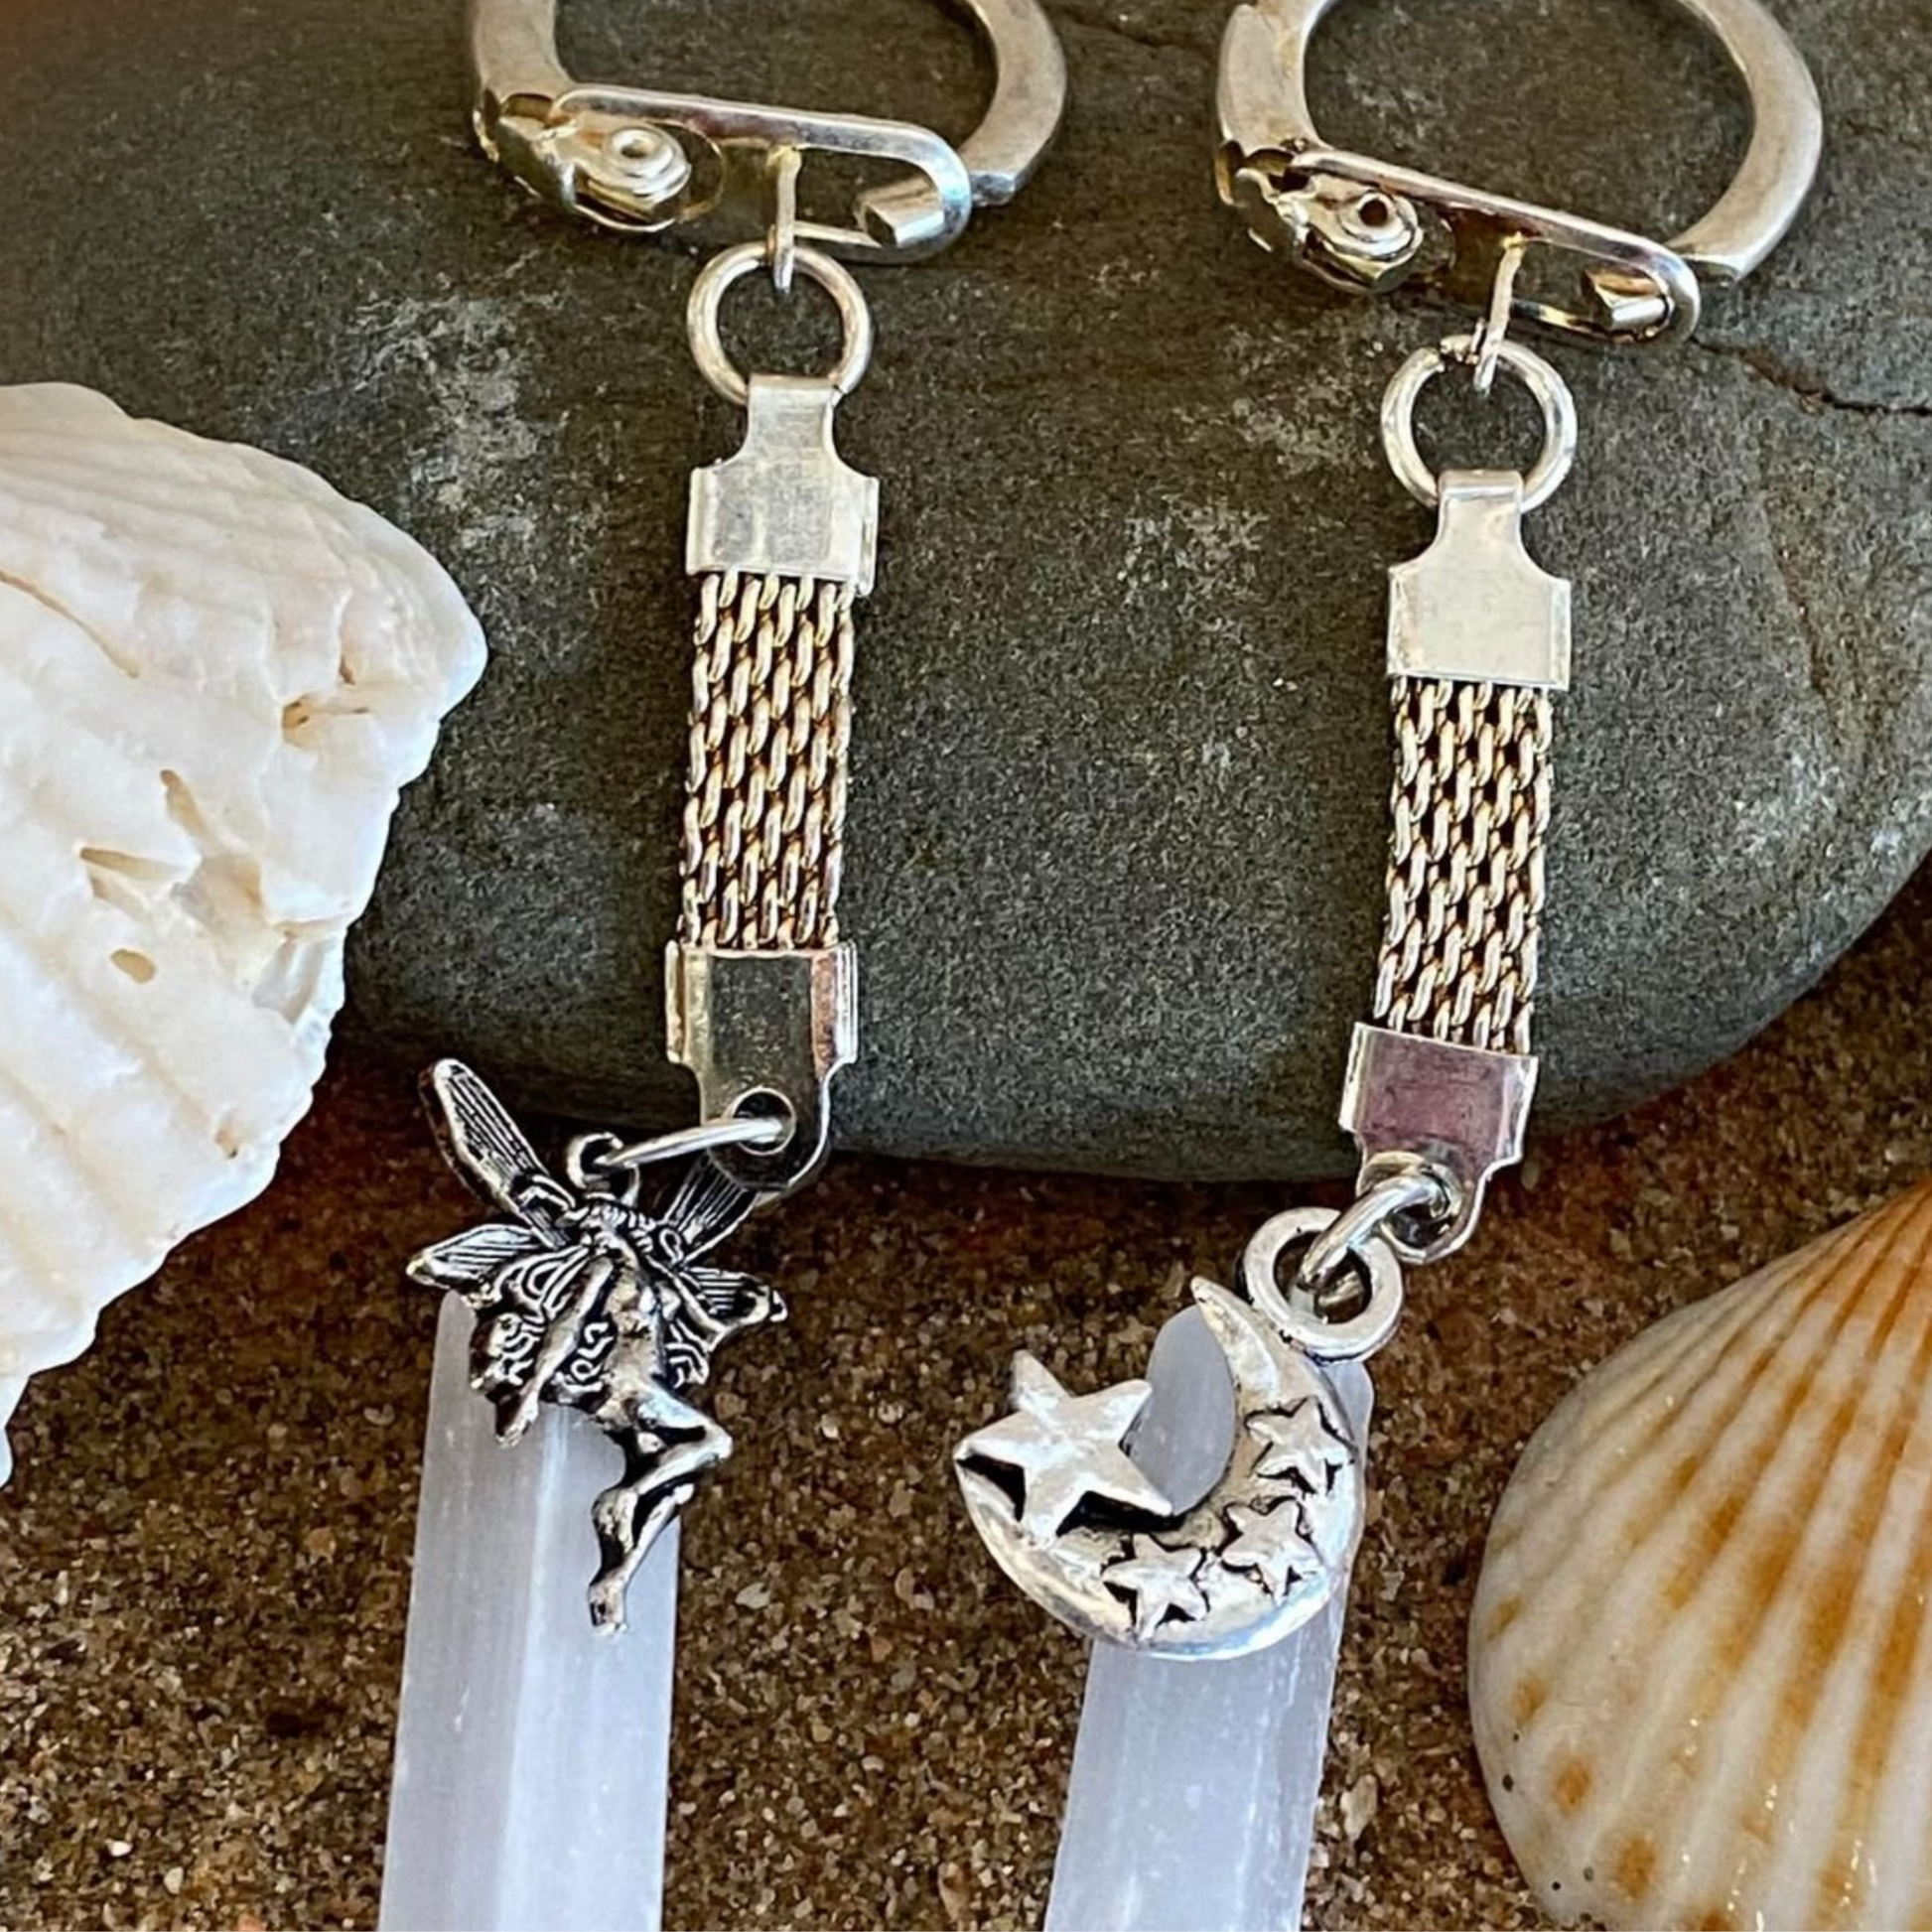 Selenite Key Rings with Fairy or Moon Charm